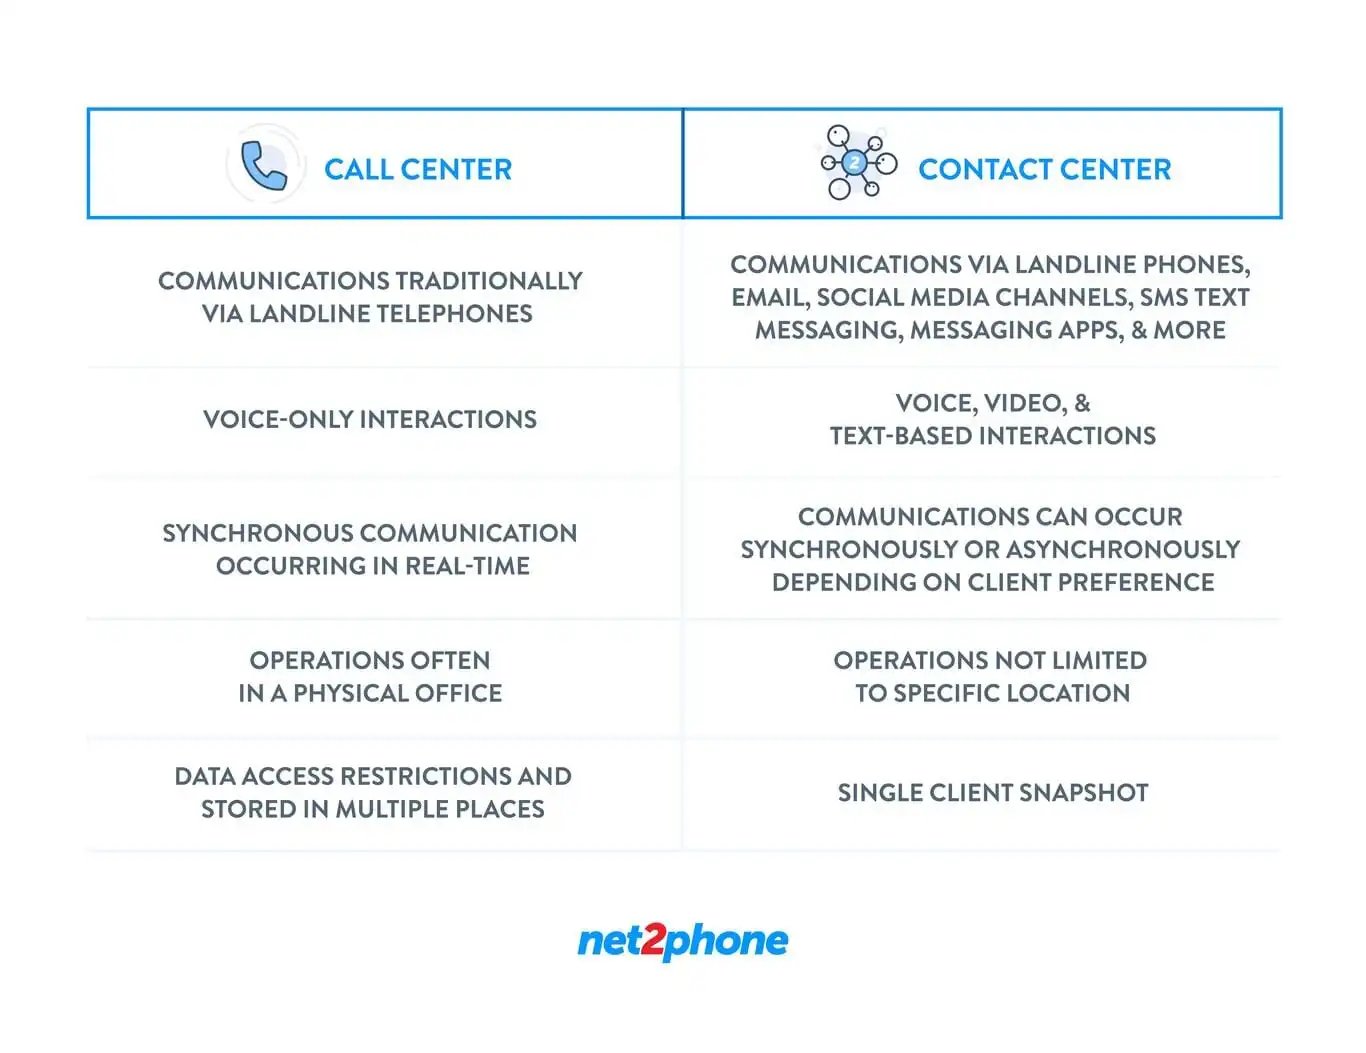 differences between a contact center and call center